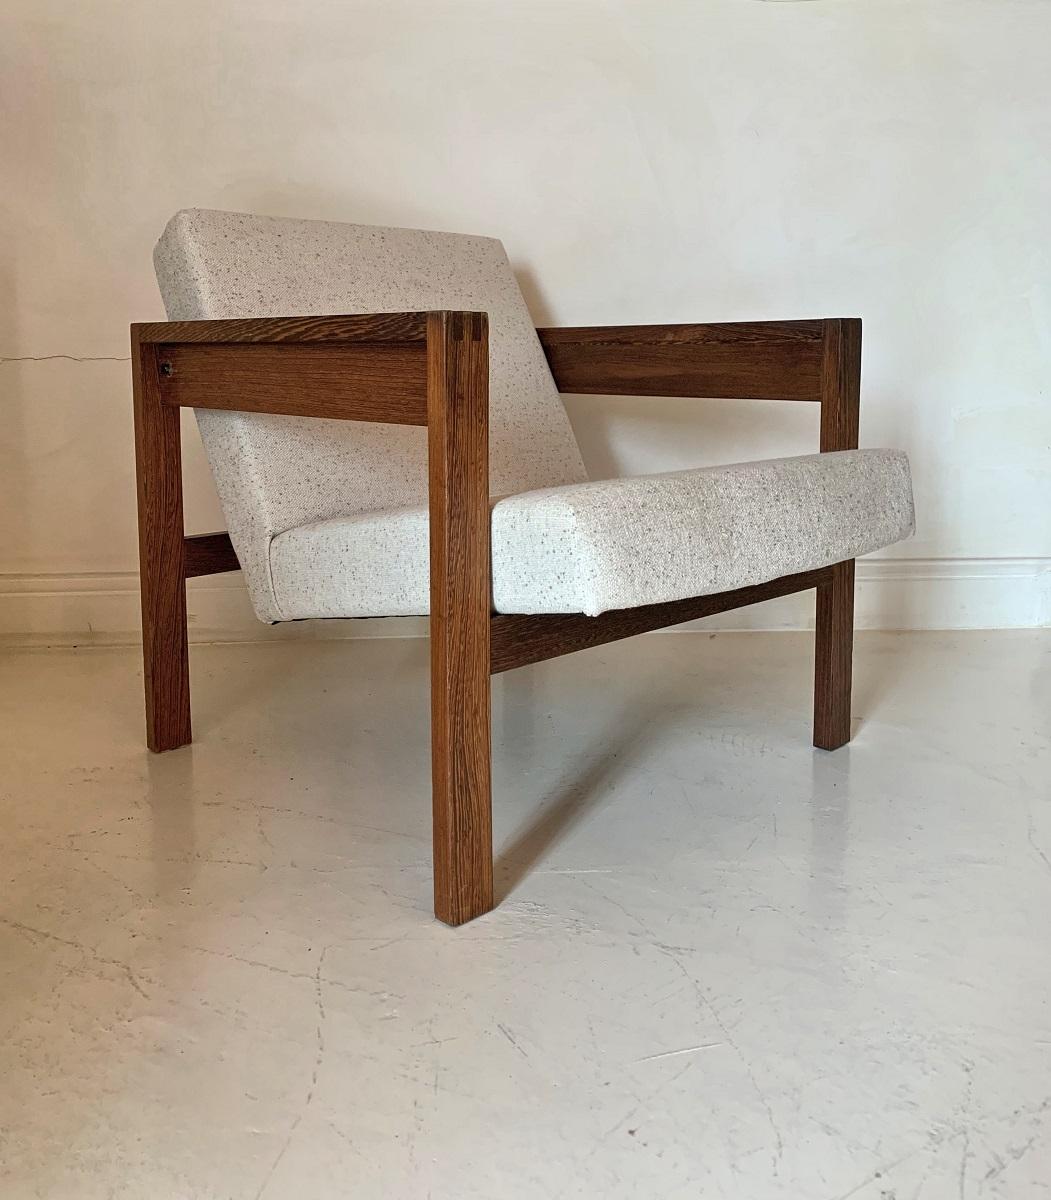 A Hein Stolle lounge chair. Made in the 1960s for Spectrum. Stolle was a hands on architect who joined the Dutch modernist movement early on and promoted high quality artisanal design. He is most known for tables and chairs. This particular model is